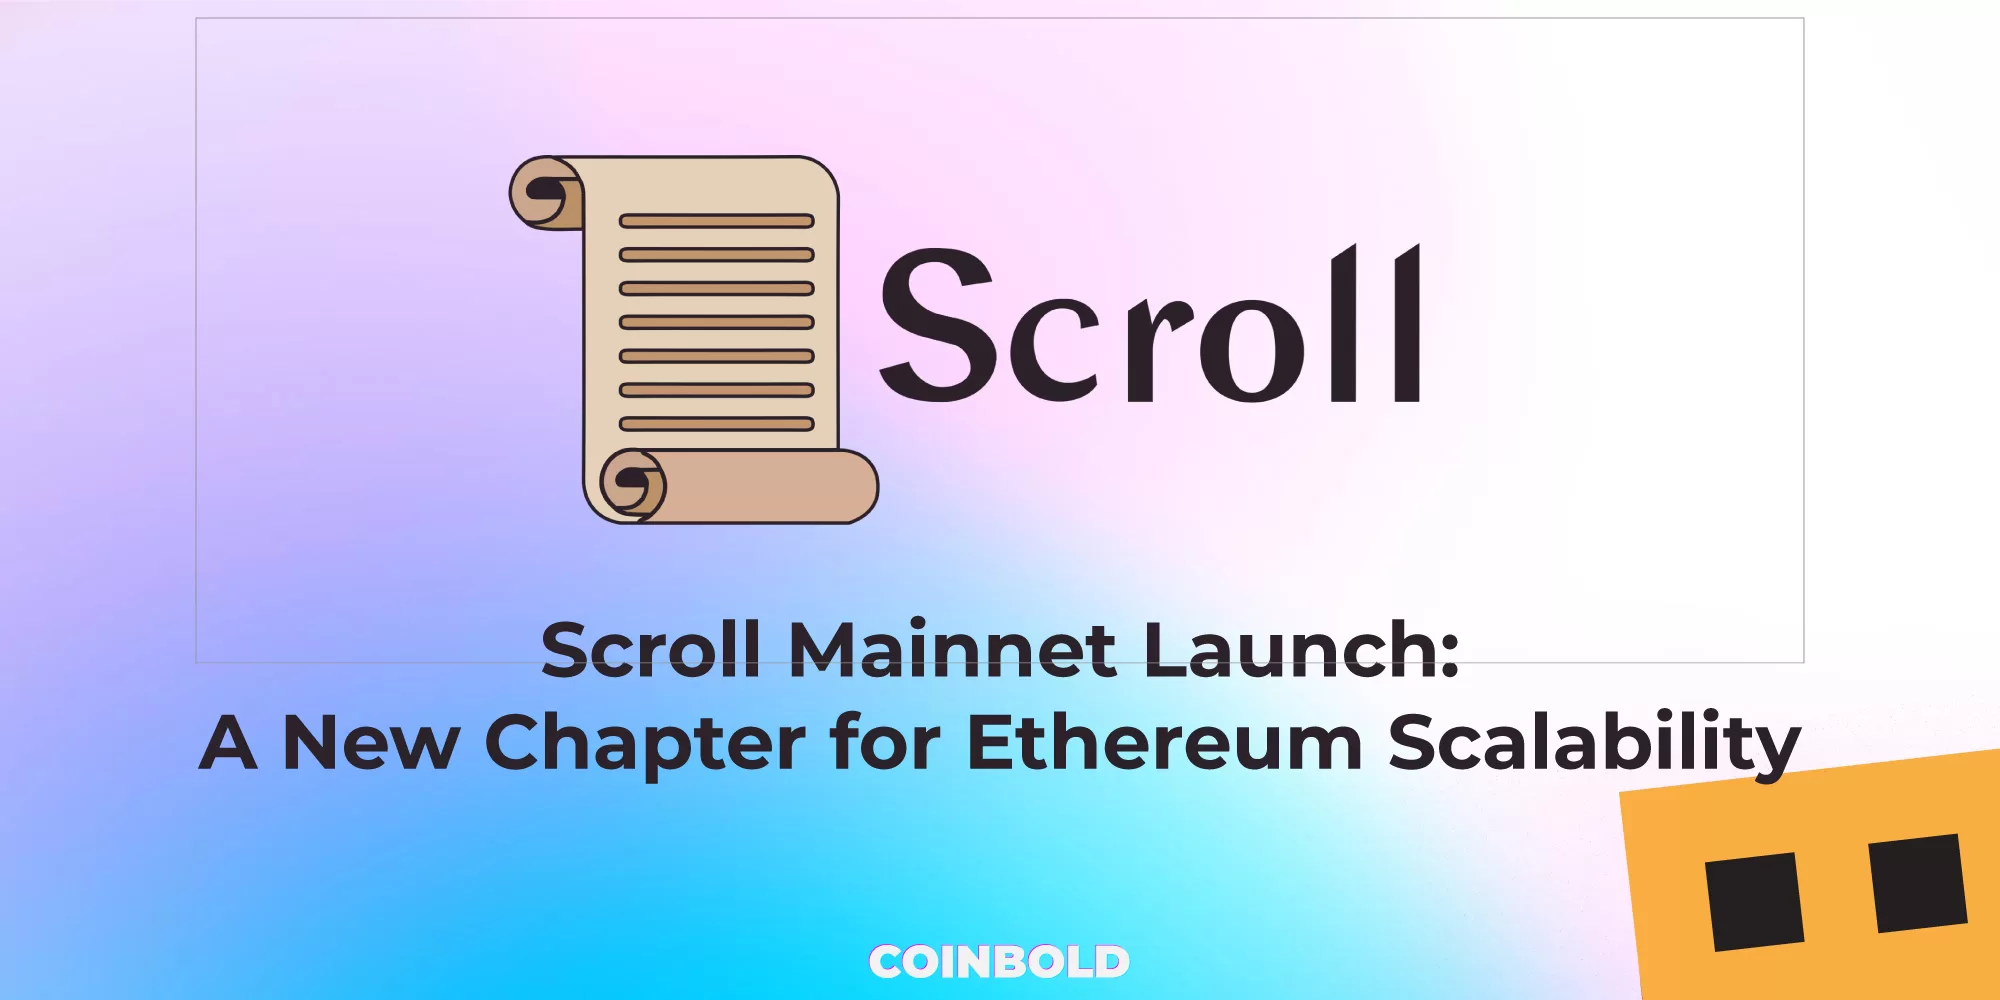 Scroll Mainnet Launch A New Chapter for Ethereum Scalability